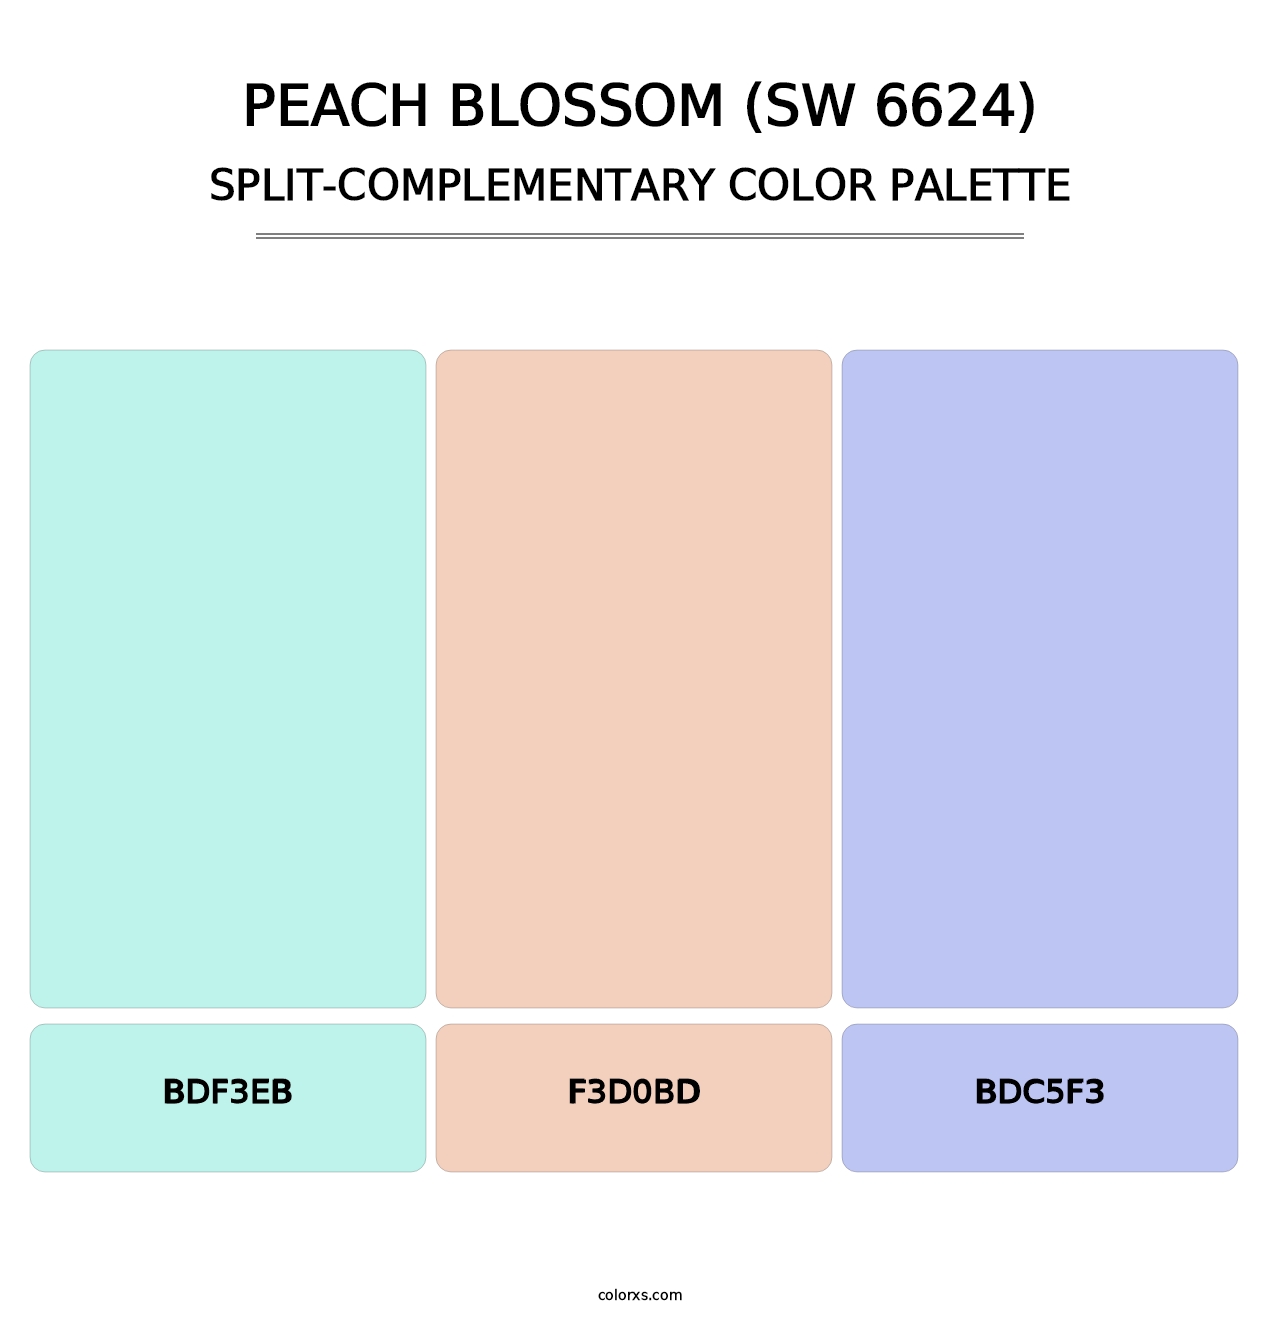 Peach Blossom (SW 6624) - Split-Complementary Color Palette